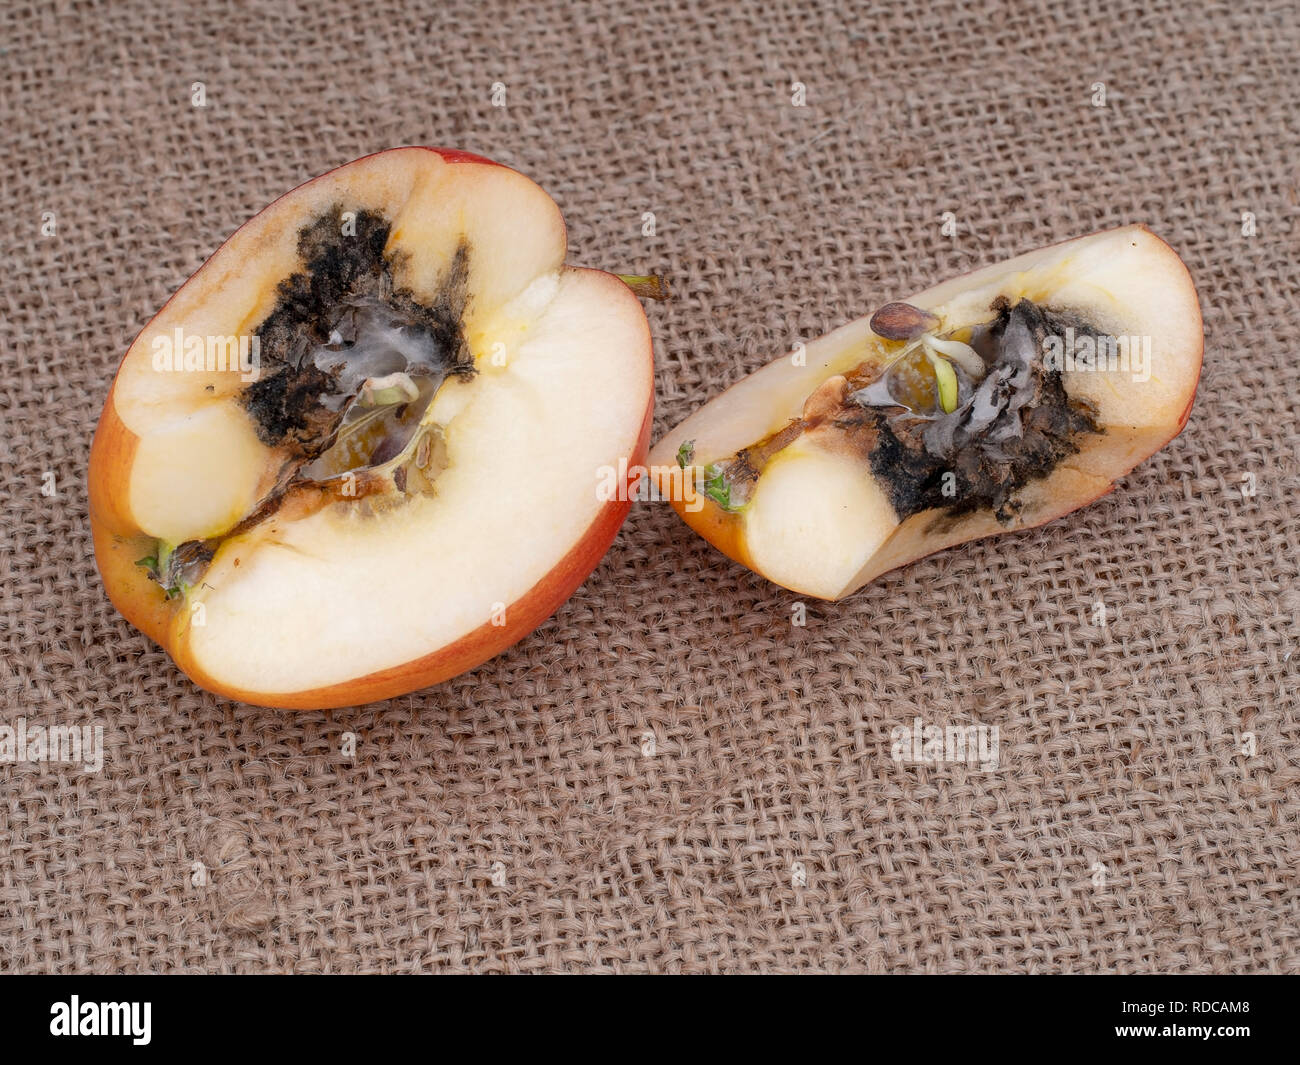 Vivipary in apple. Sliced to clearly show seeds, pips are already growing in the core when the fruit is cut open. On hessian with copyspace. Stock Photo